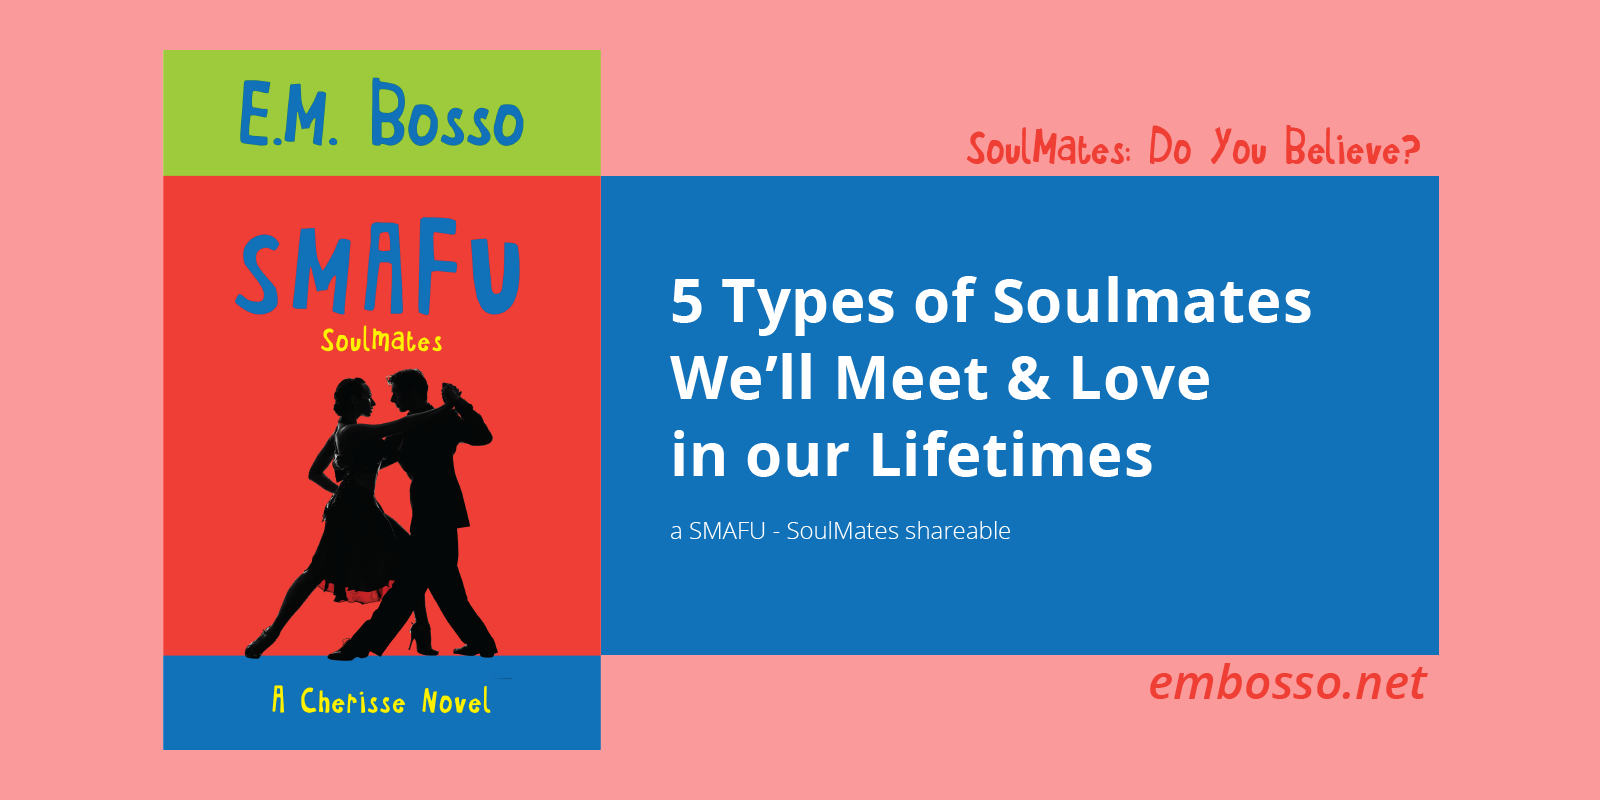 Image featuring the cover of my new book SMAFU - SoulMates and the title of this week's shareable article on 5 soulmate relationship Types